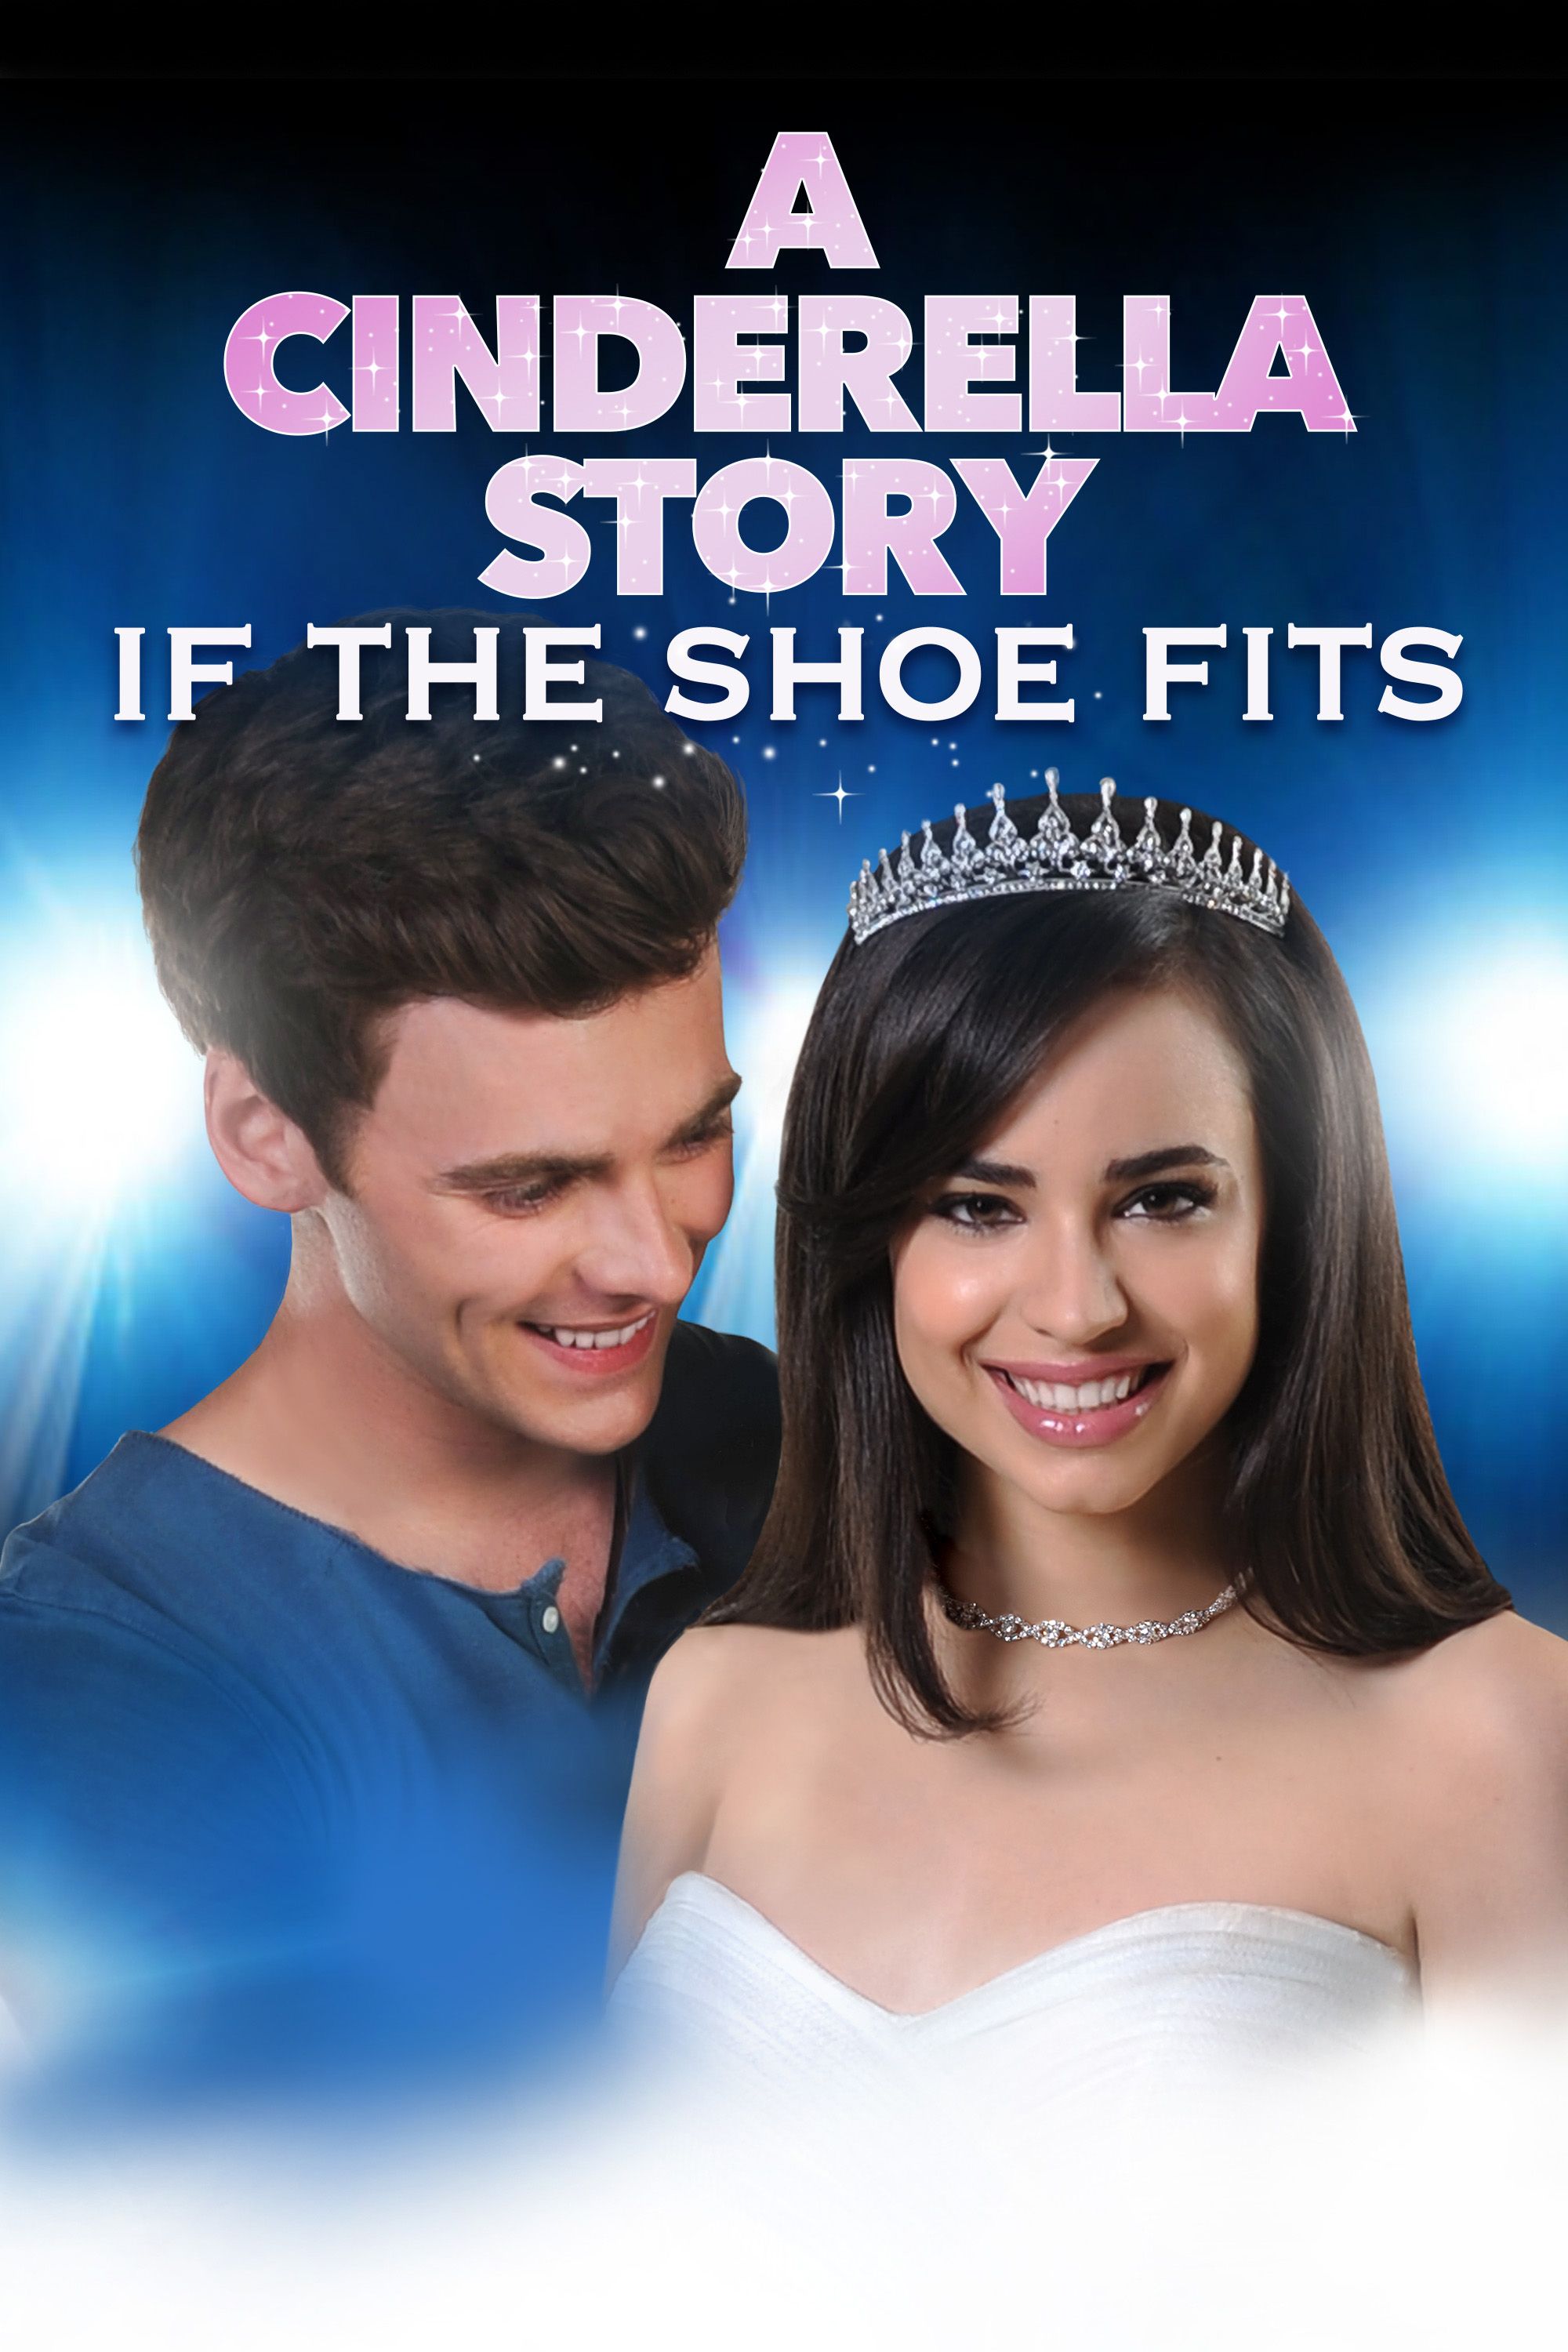 a cinderella story if the shoe fits full movie free